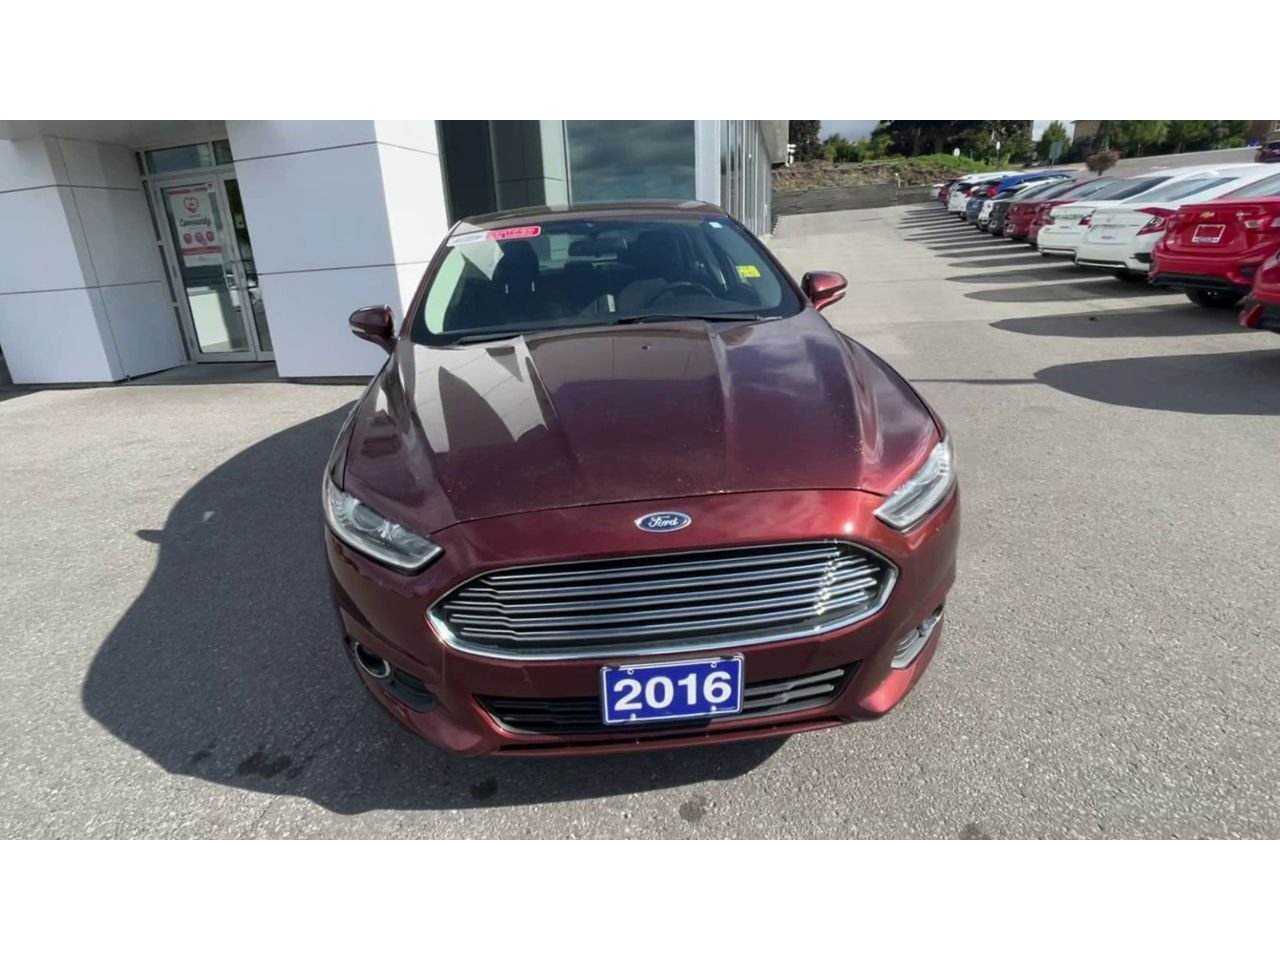 2016 Ford Fusion - P21337 Full Image 3